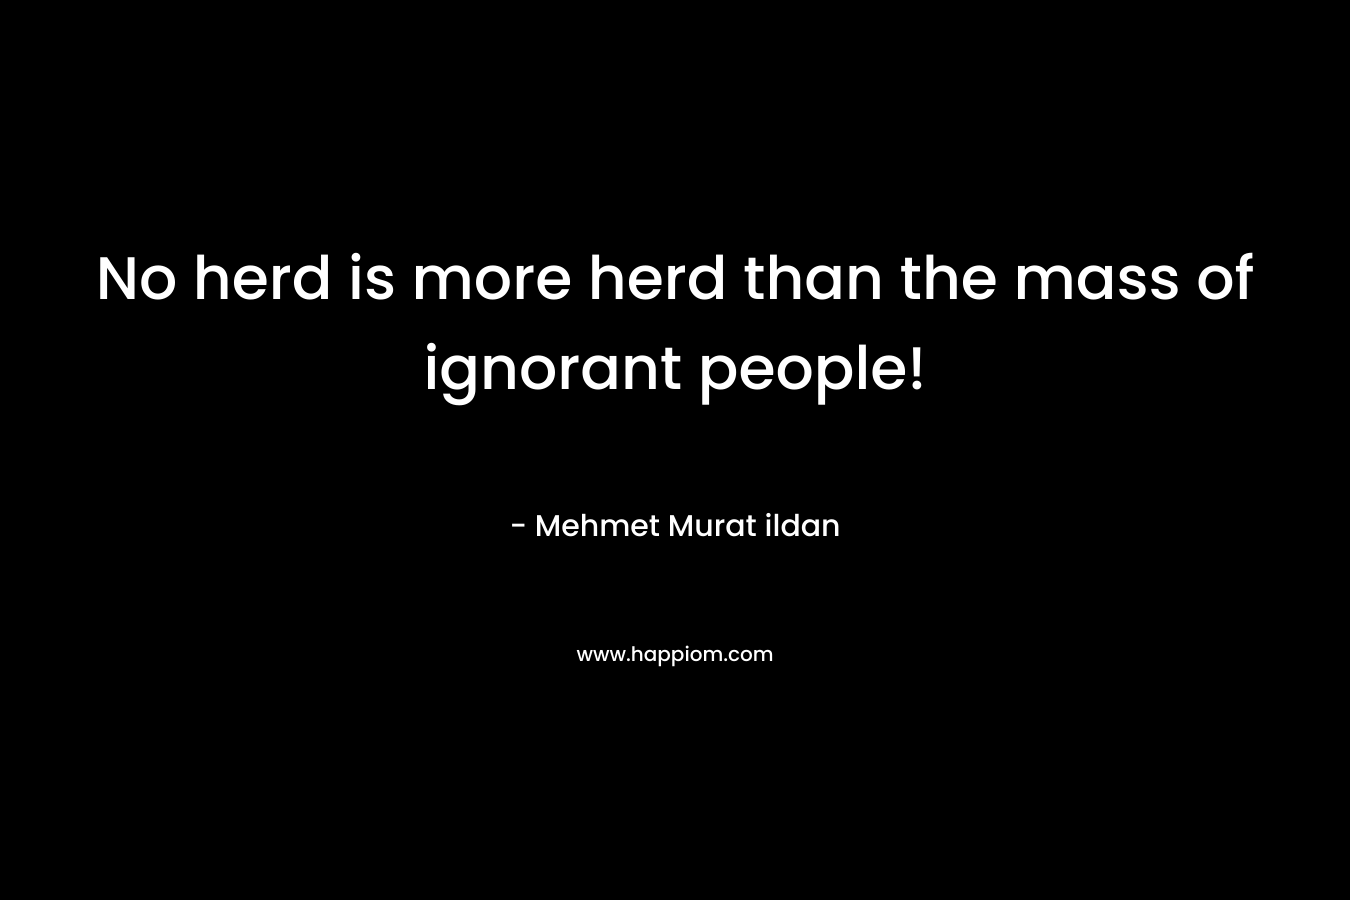 No herd is more herd than the mass of ignorant people!